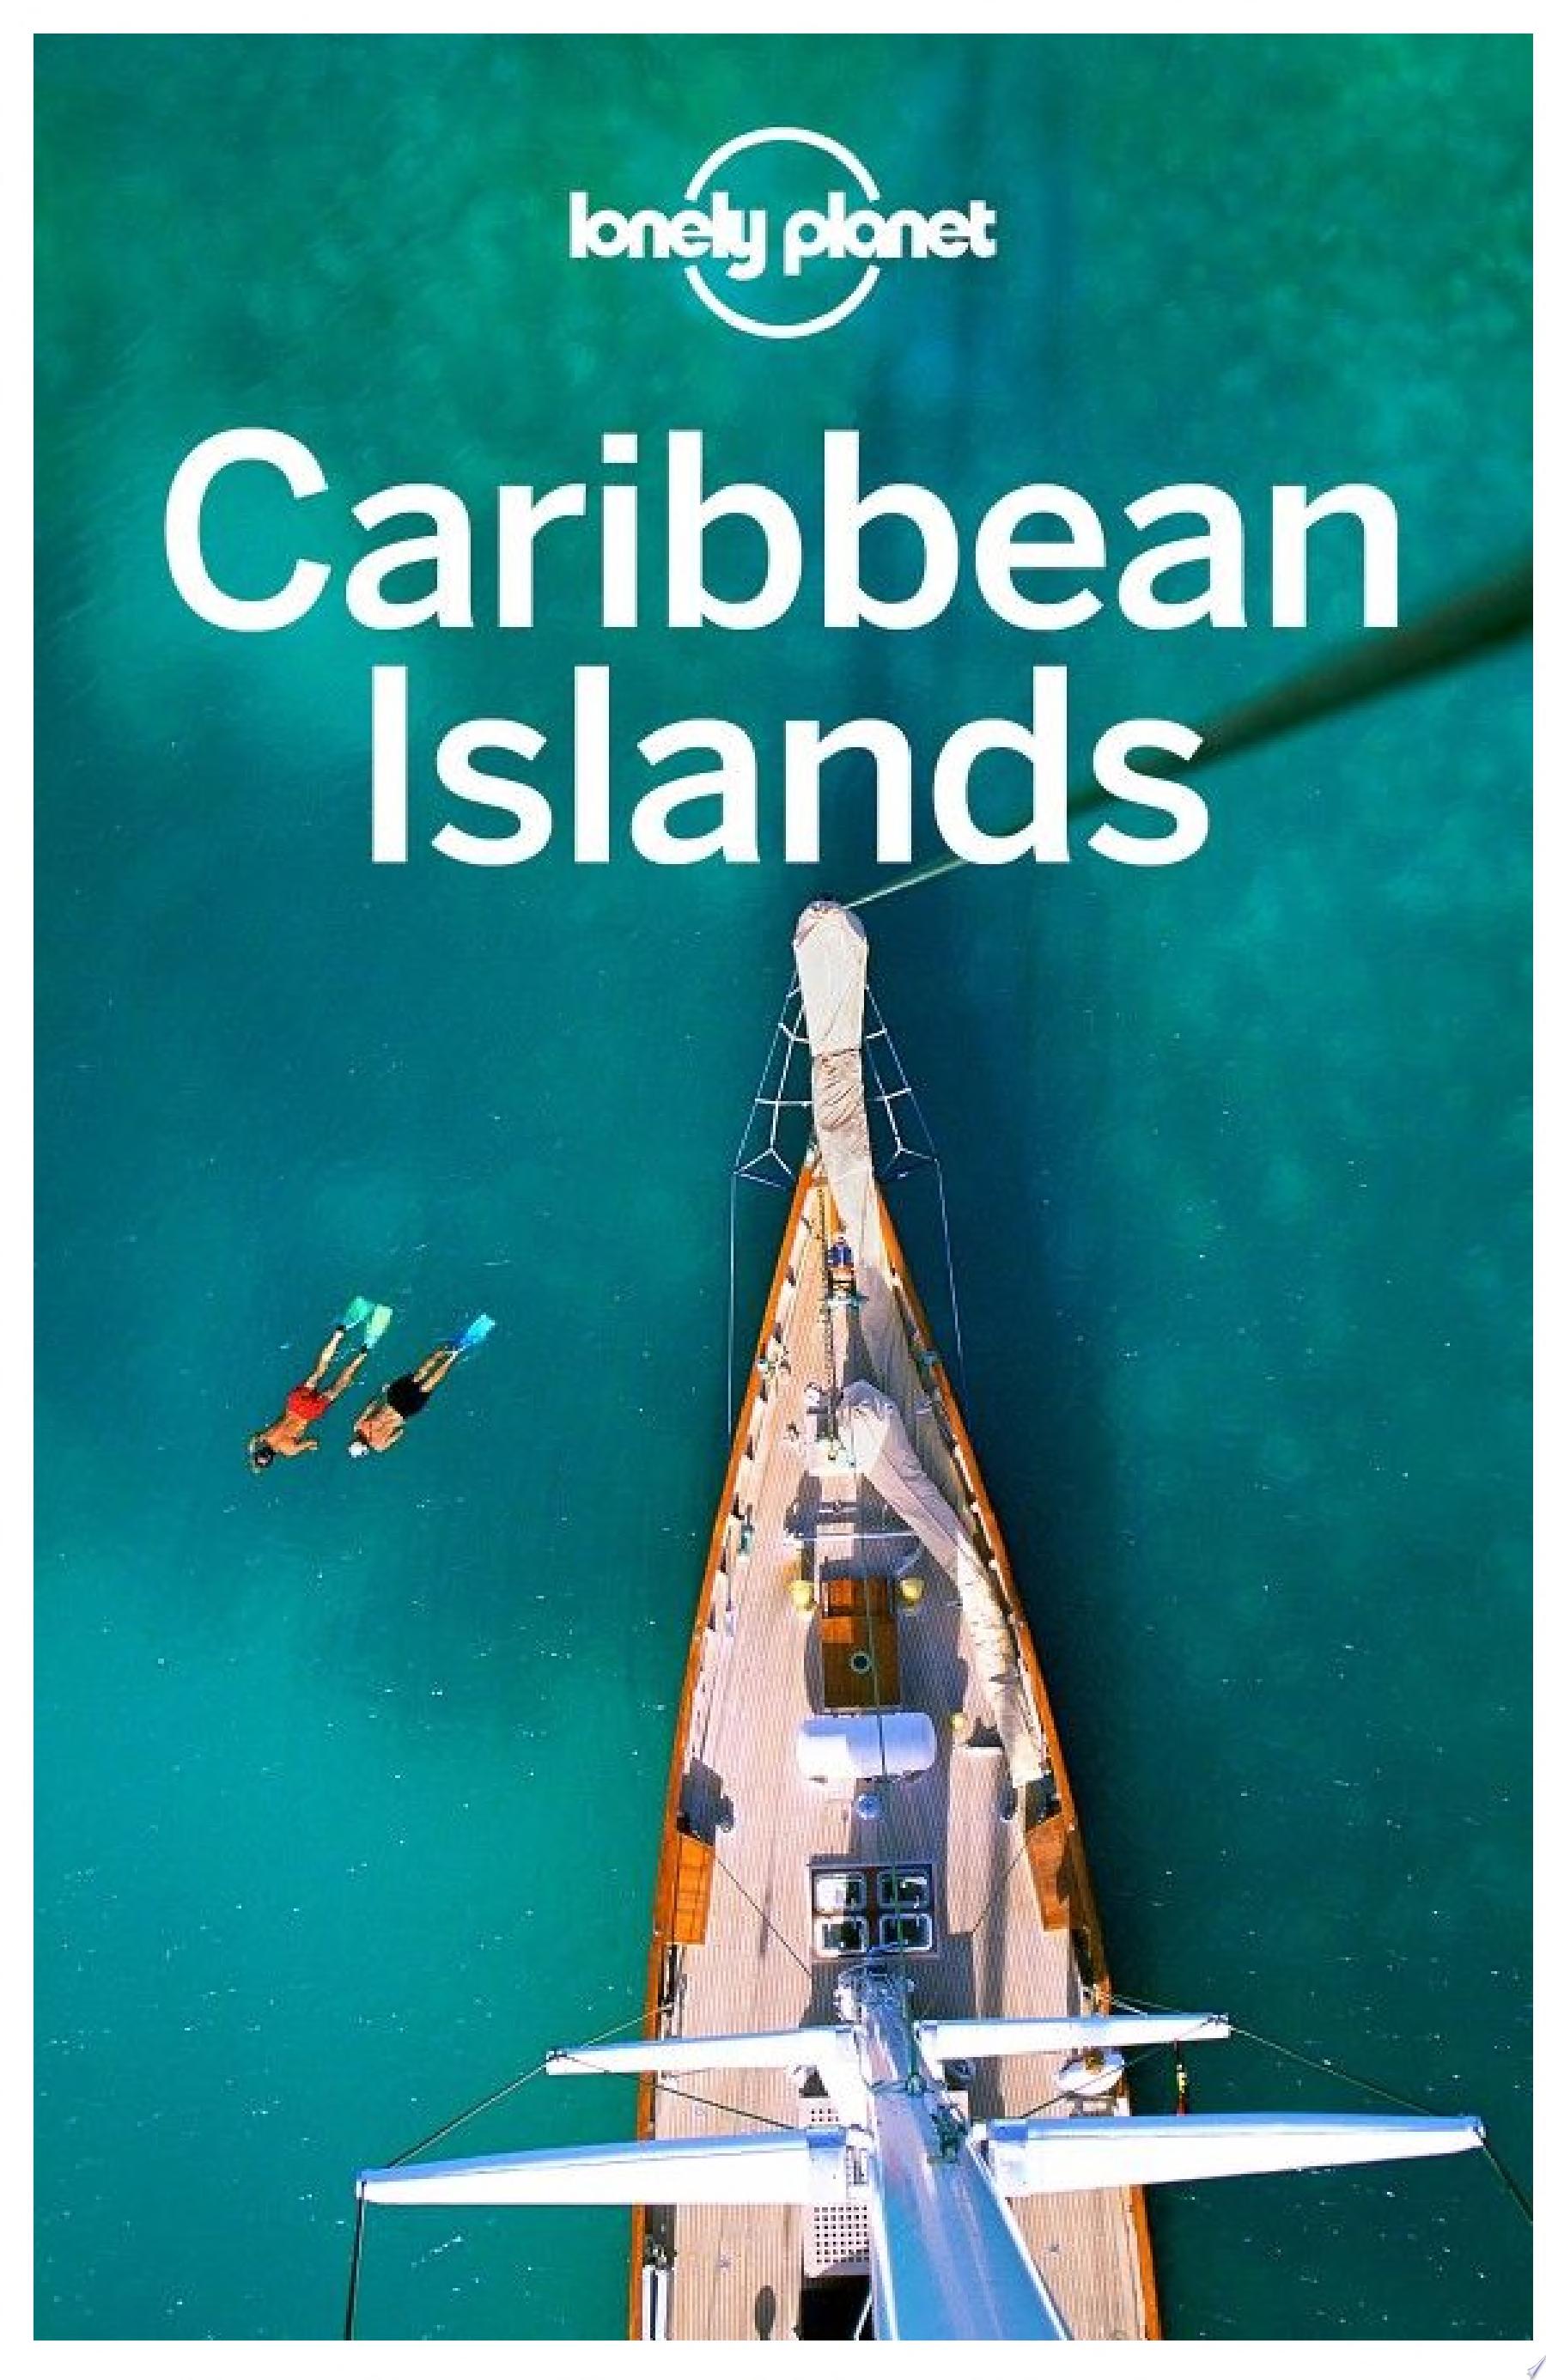 Image for "Lonely Planet Caribbean Islands"